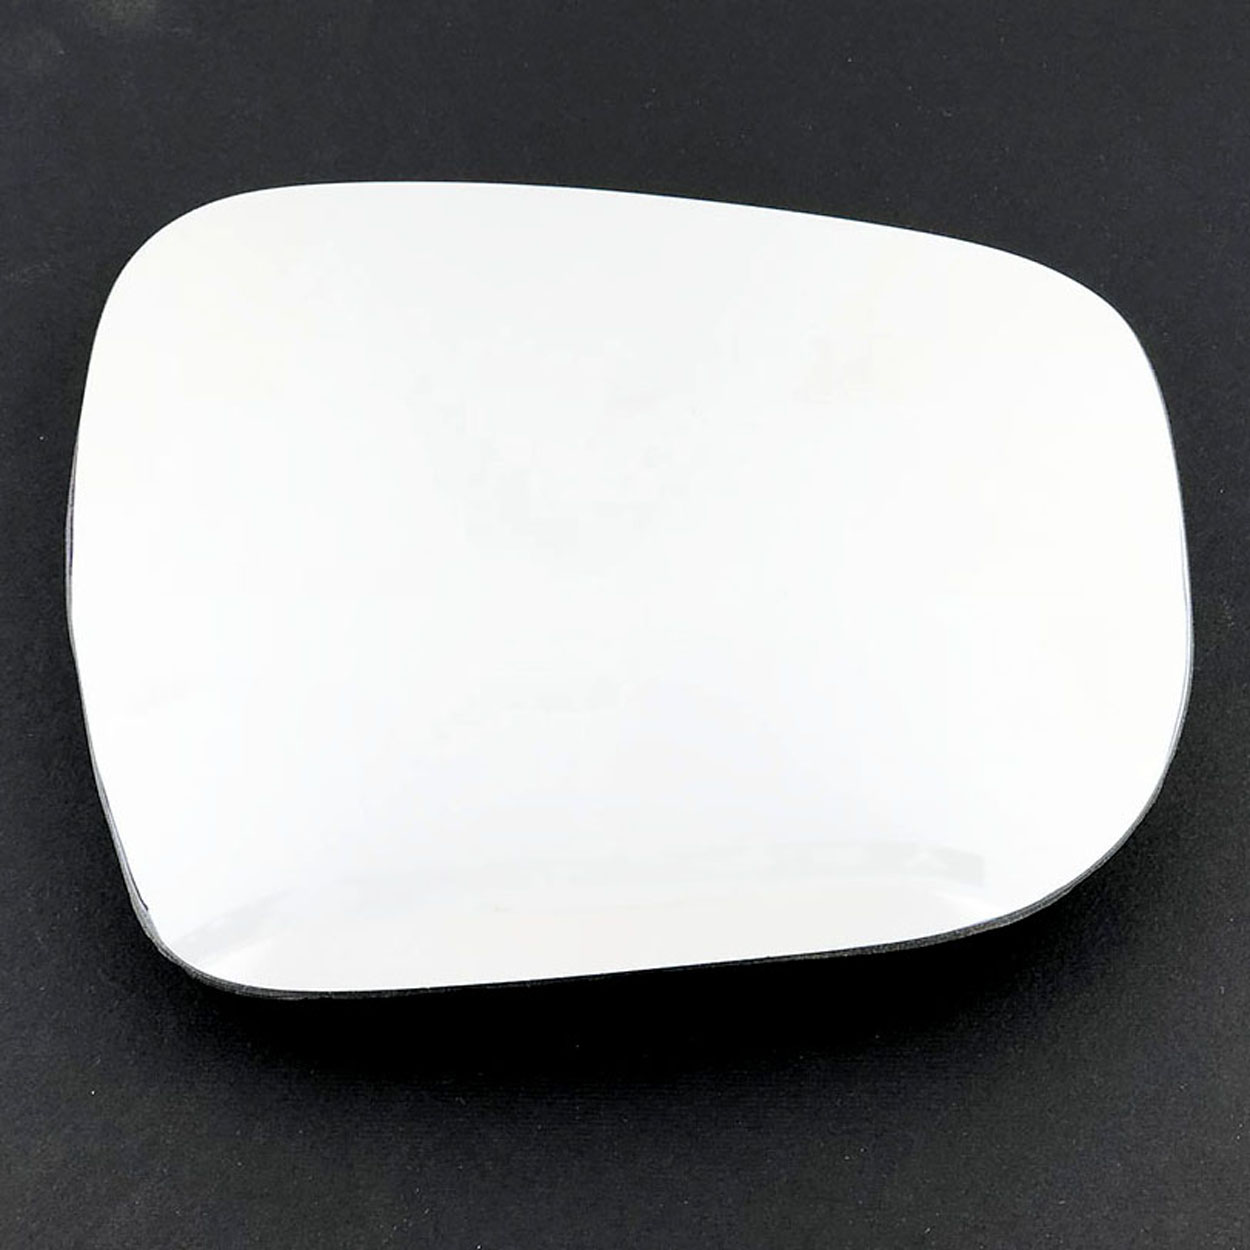 Nissan Navara Wing Mirror Glass RIGHT HAND ( UK Driver Side ) 2016 to 2021 – Convex Wing Mirror